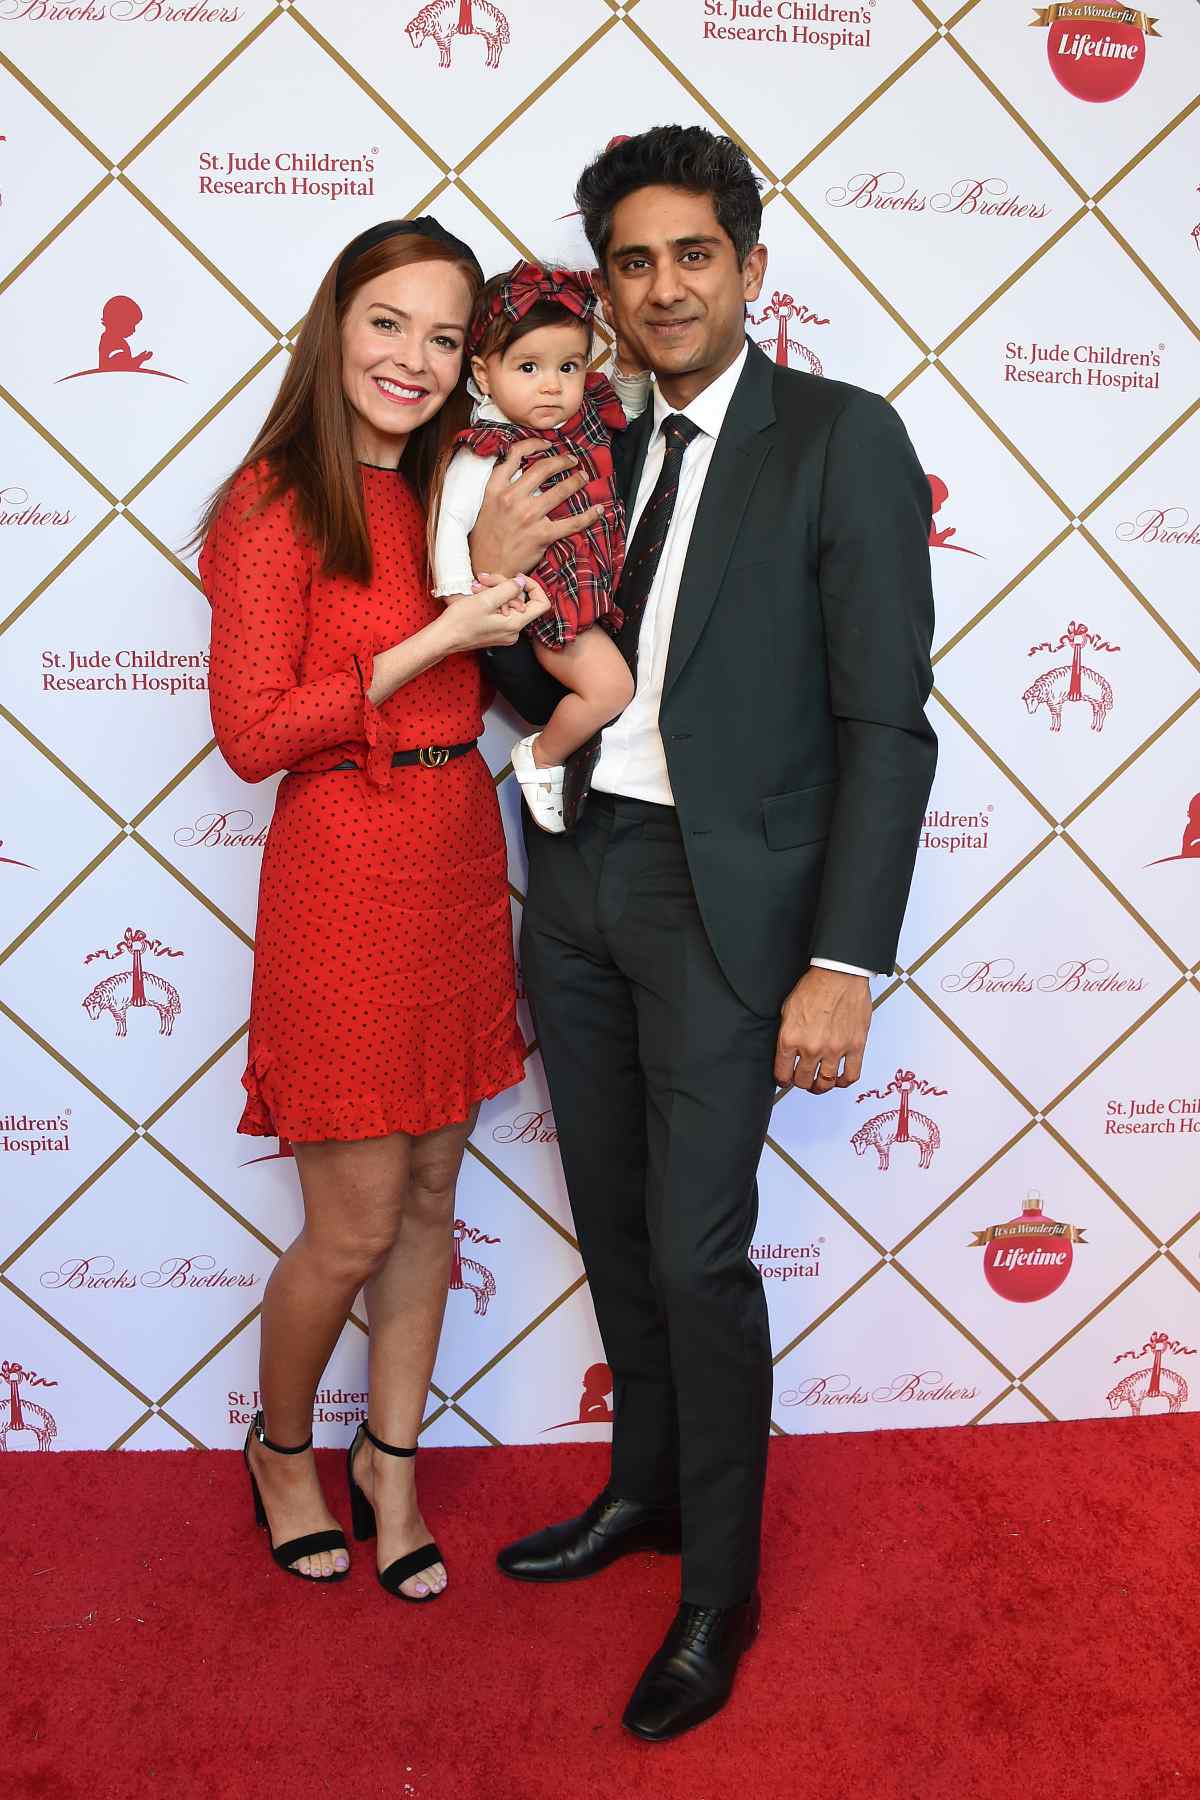 Brooks Brothers Hosts Seventh Annual Family Holiday Party In Beverly Hills